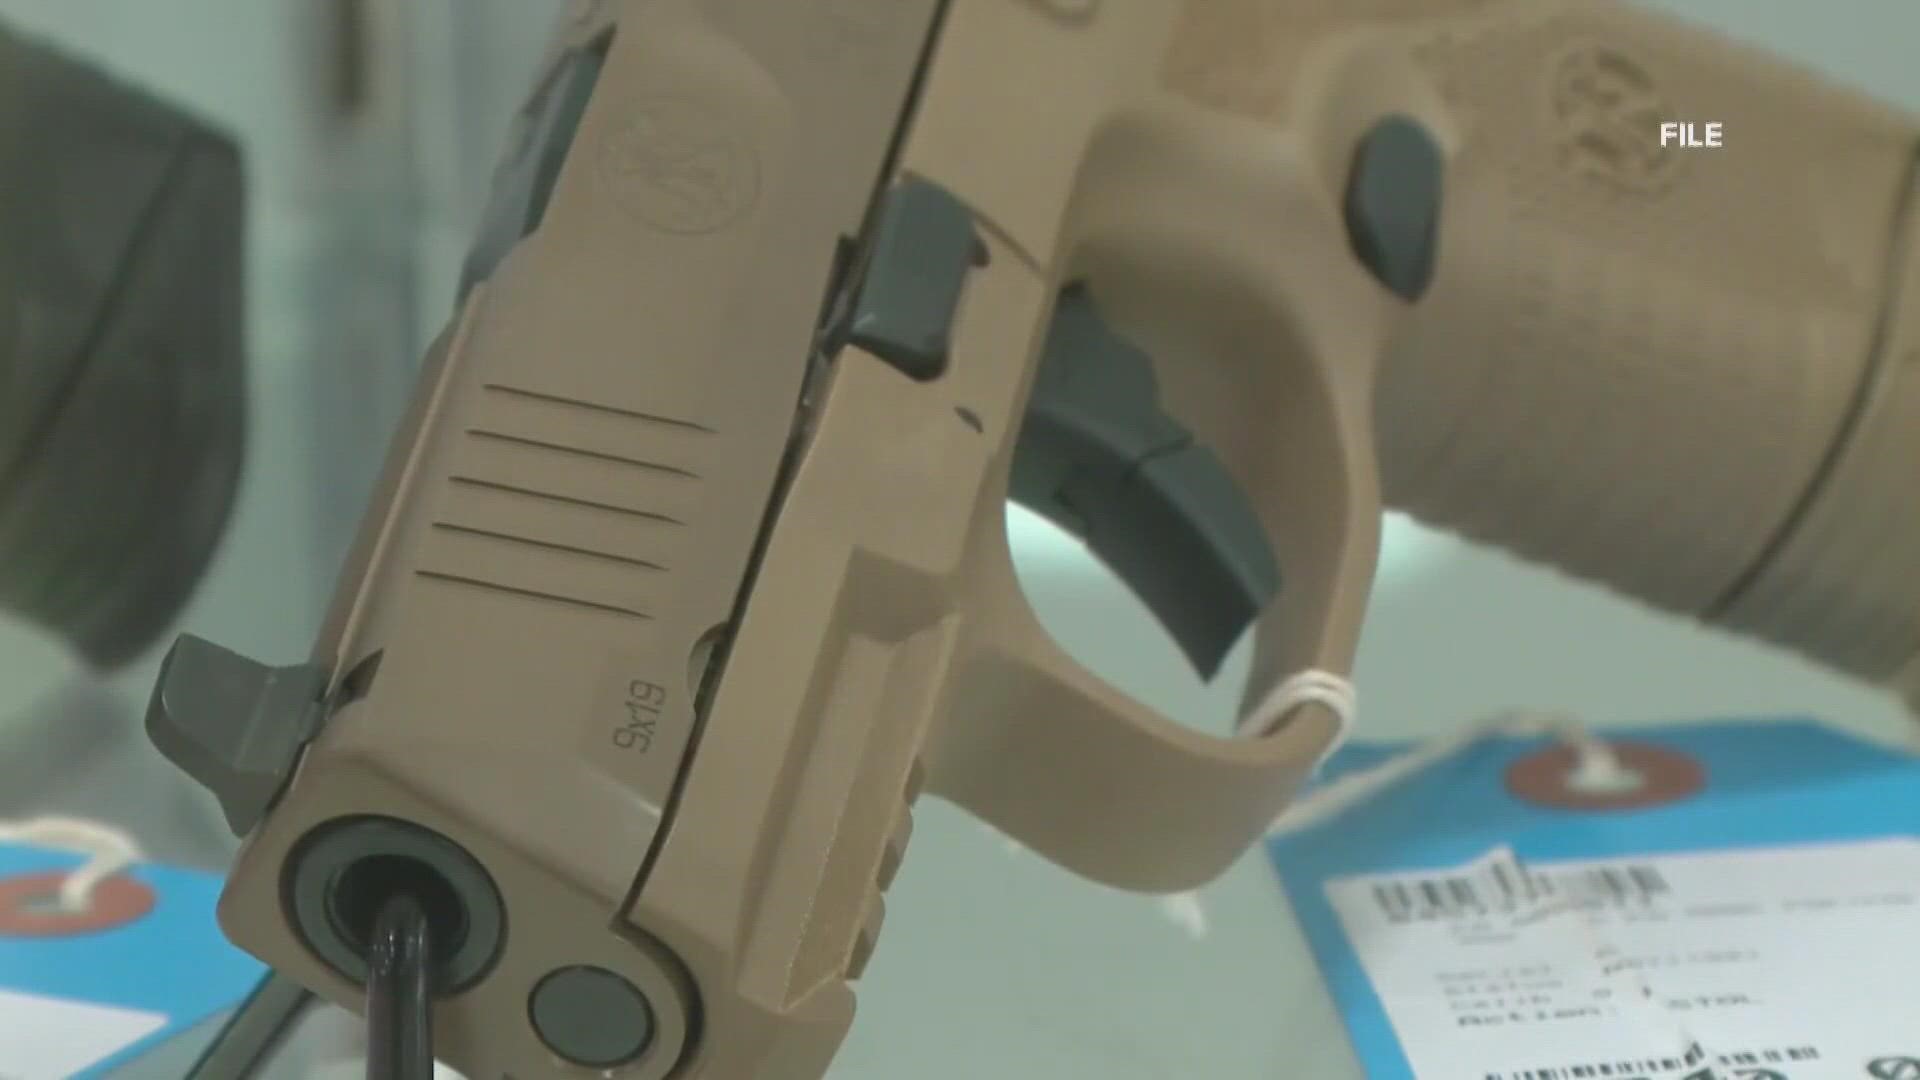 In a new mandatory report, DHHS found 86% of all gun deaths were suicides.